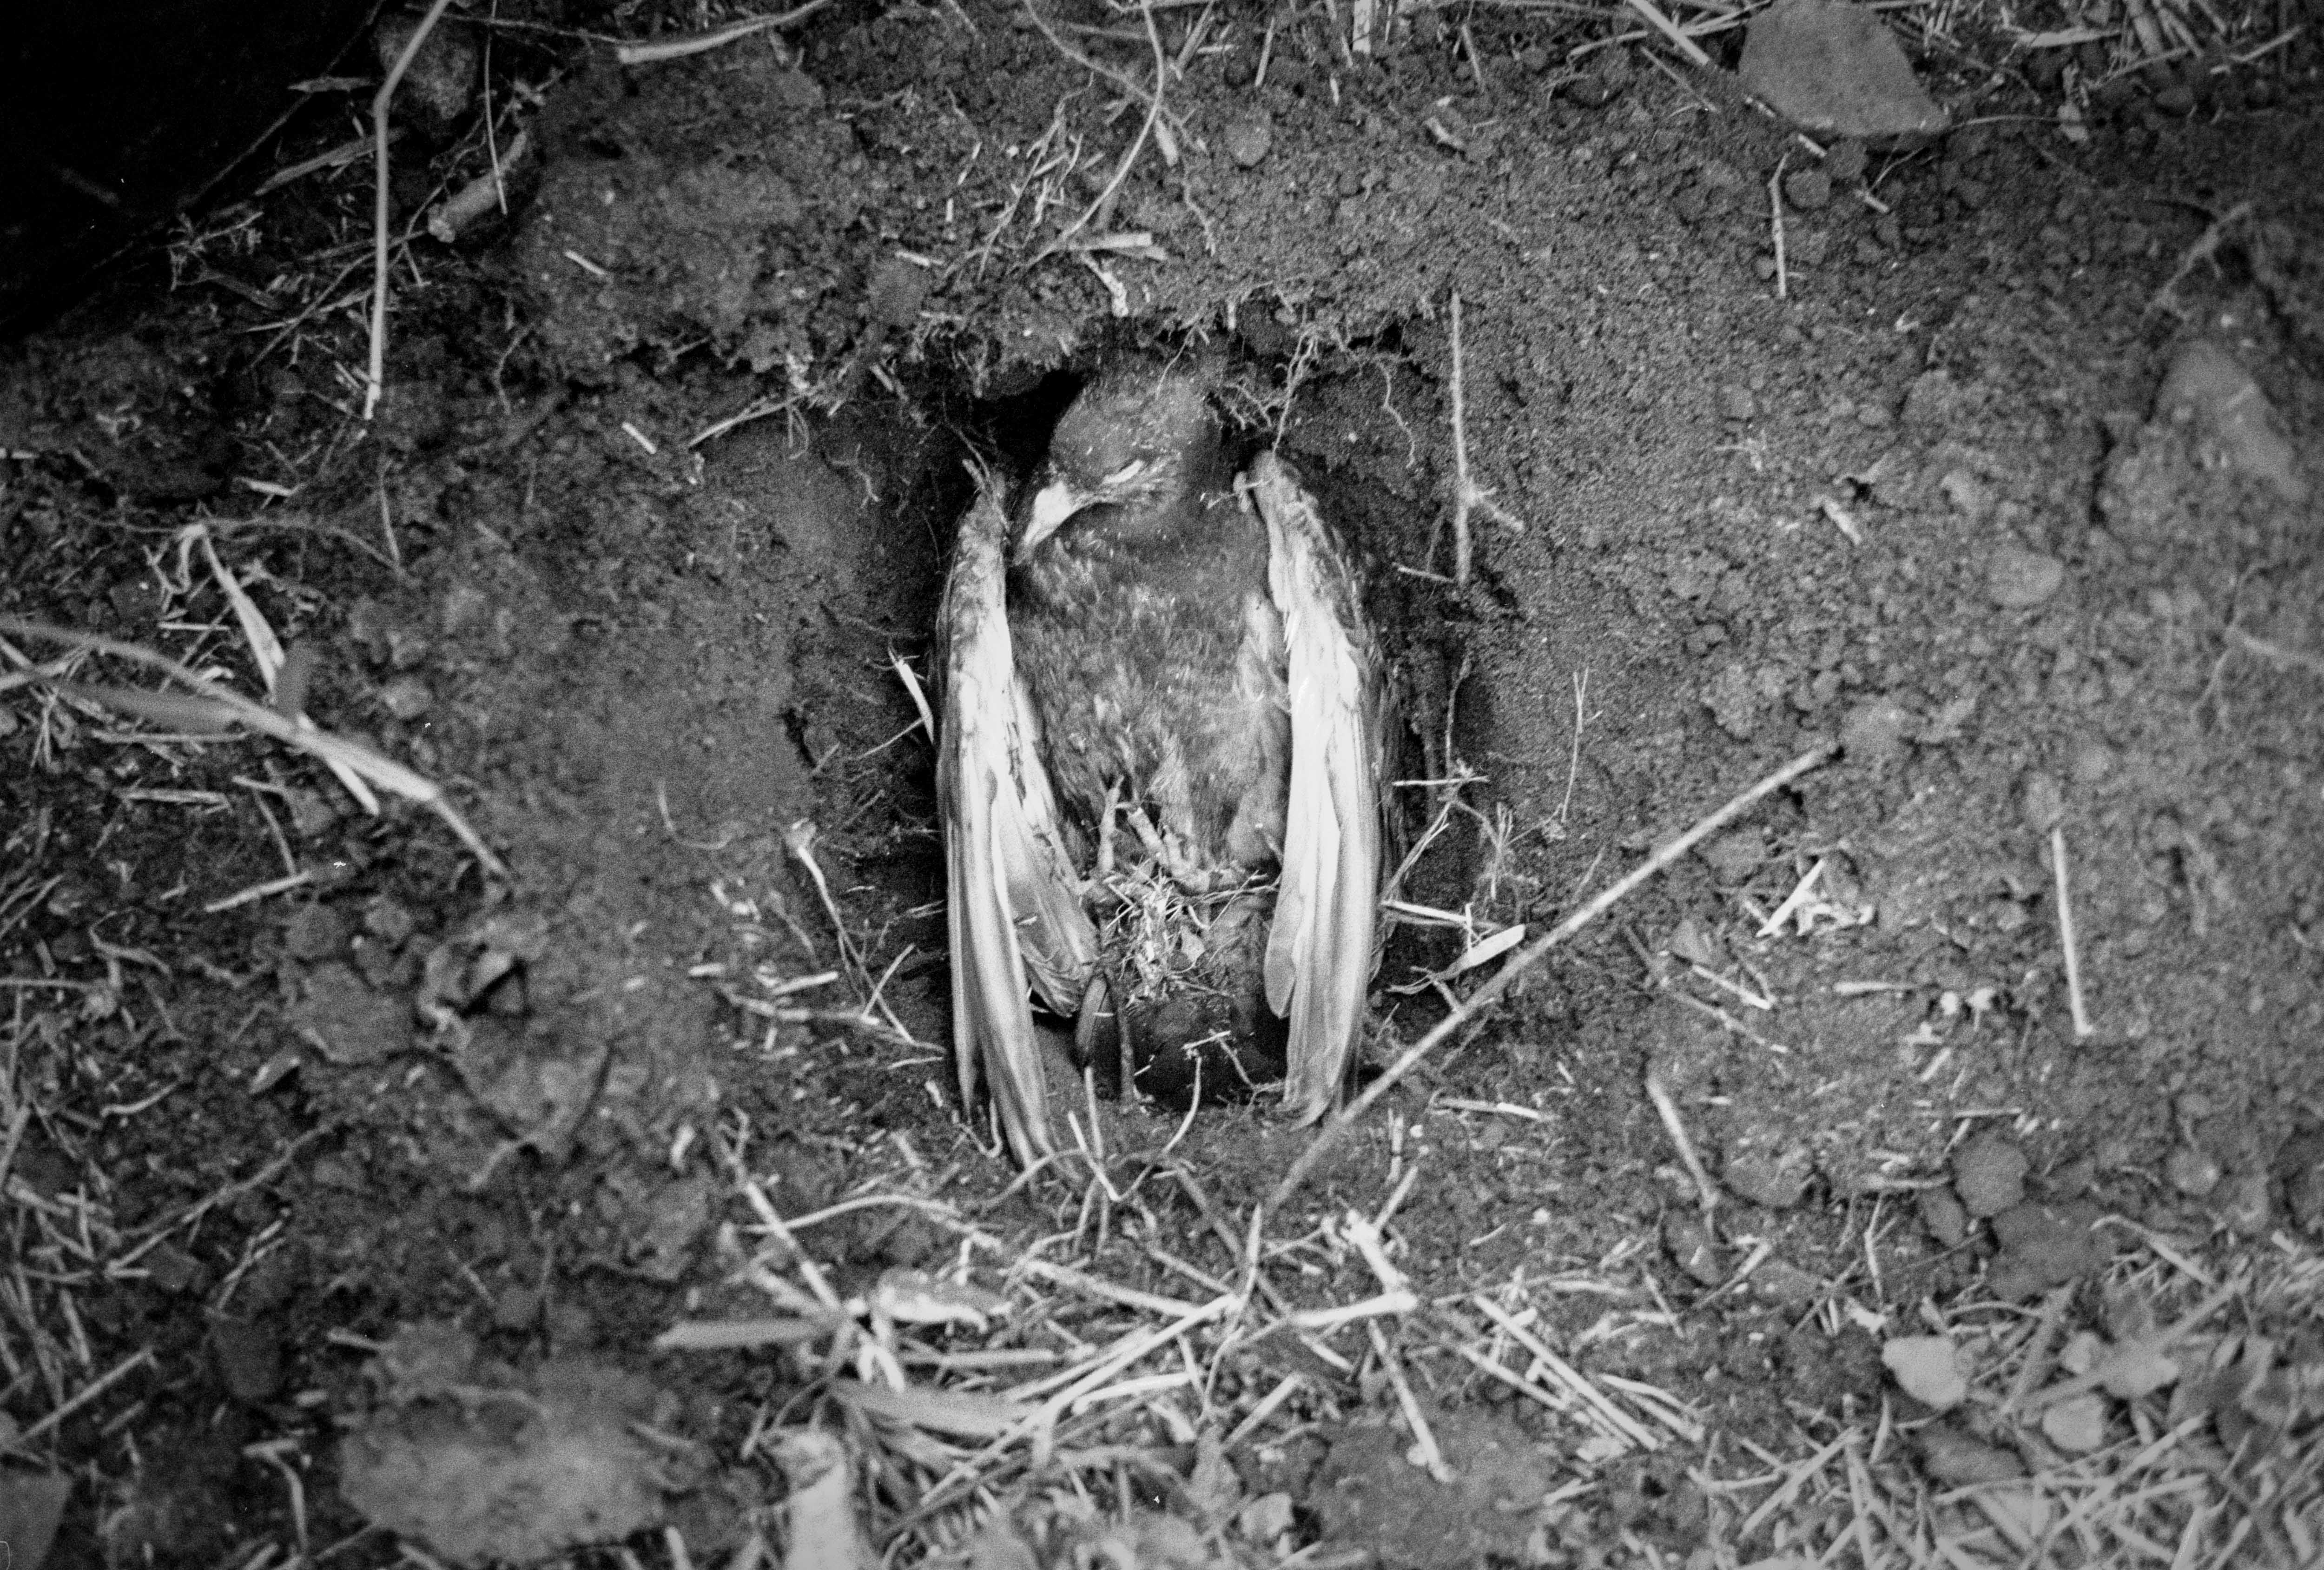 Black and white photograph of a bird that has died, lying peacefully in a hollow on the ground